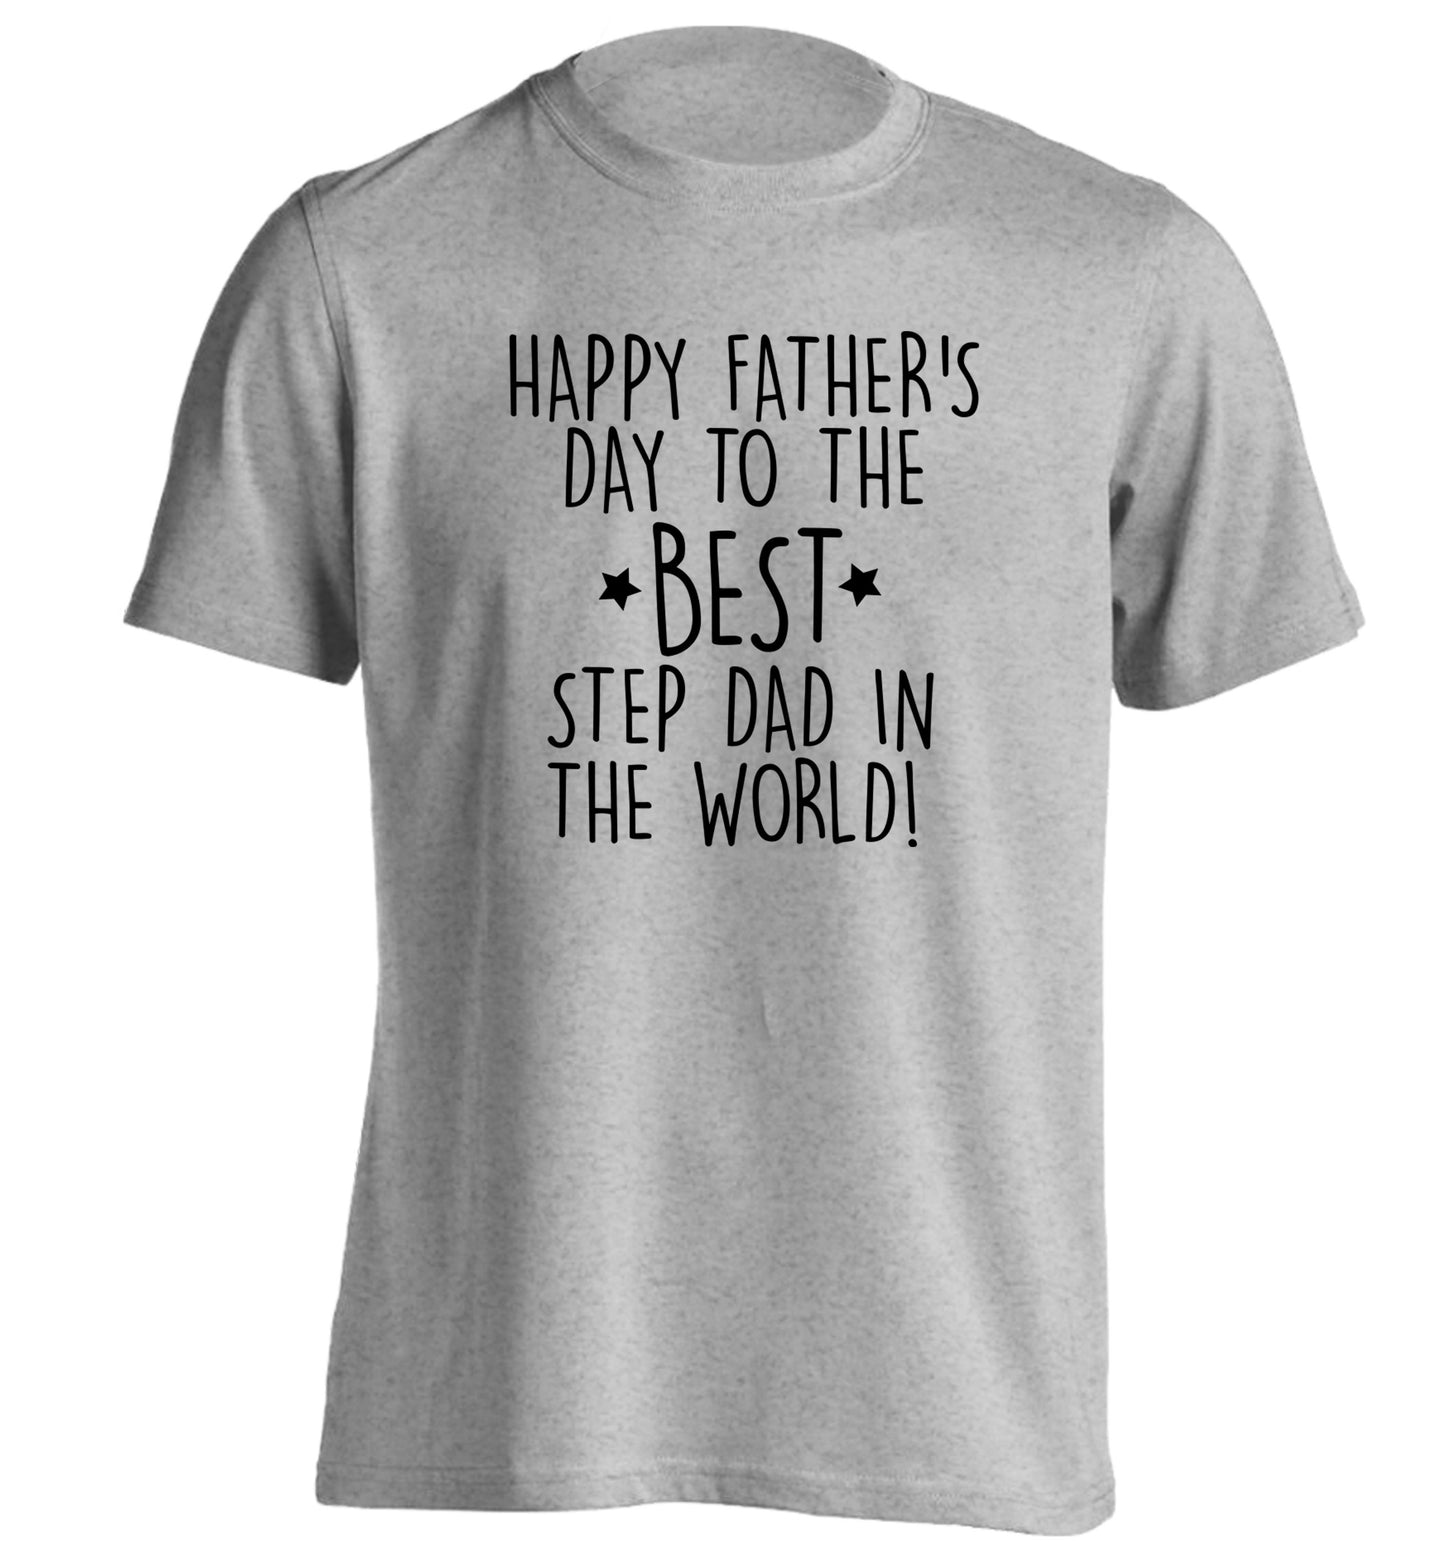 Happy Father's day to the best step dad in the world! adults unisex grey Tshirt 2XL